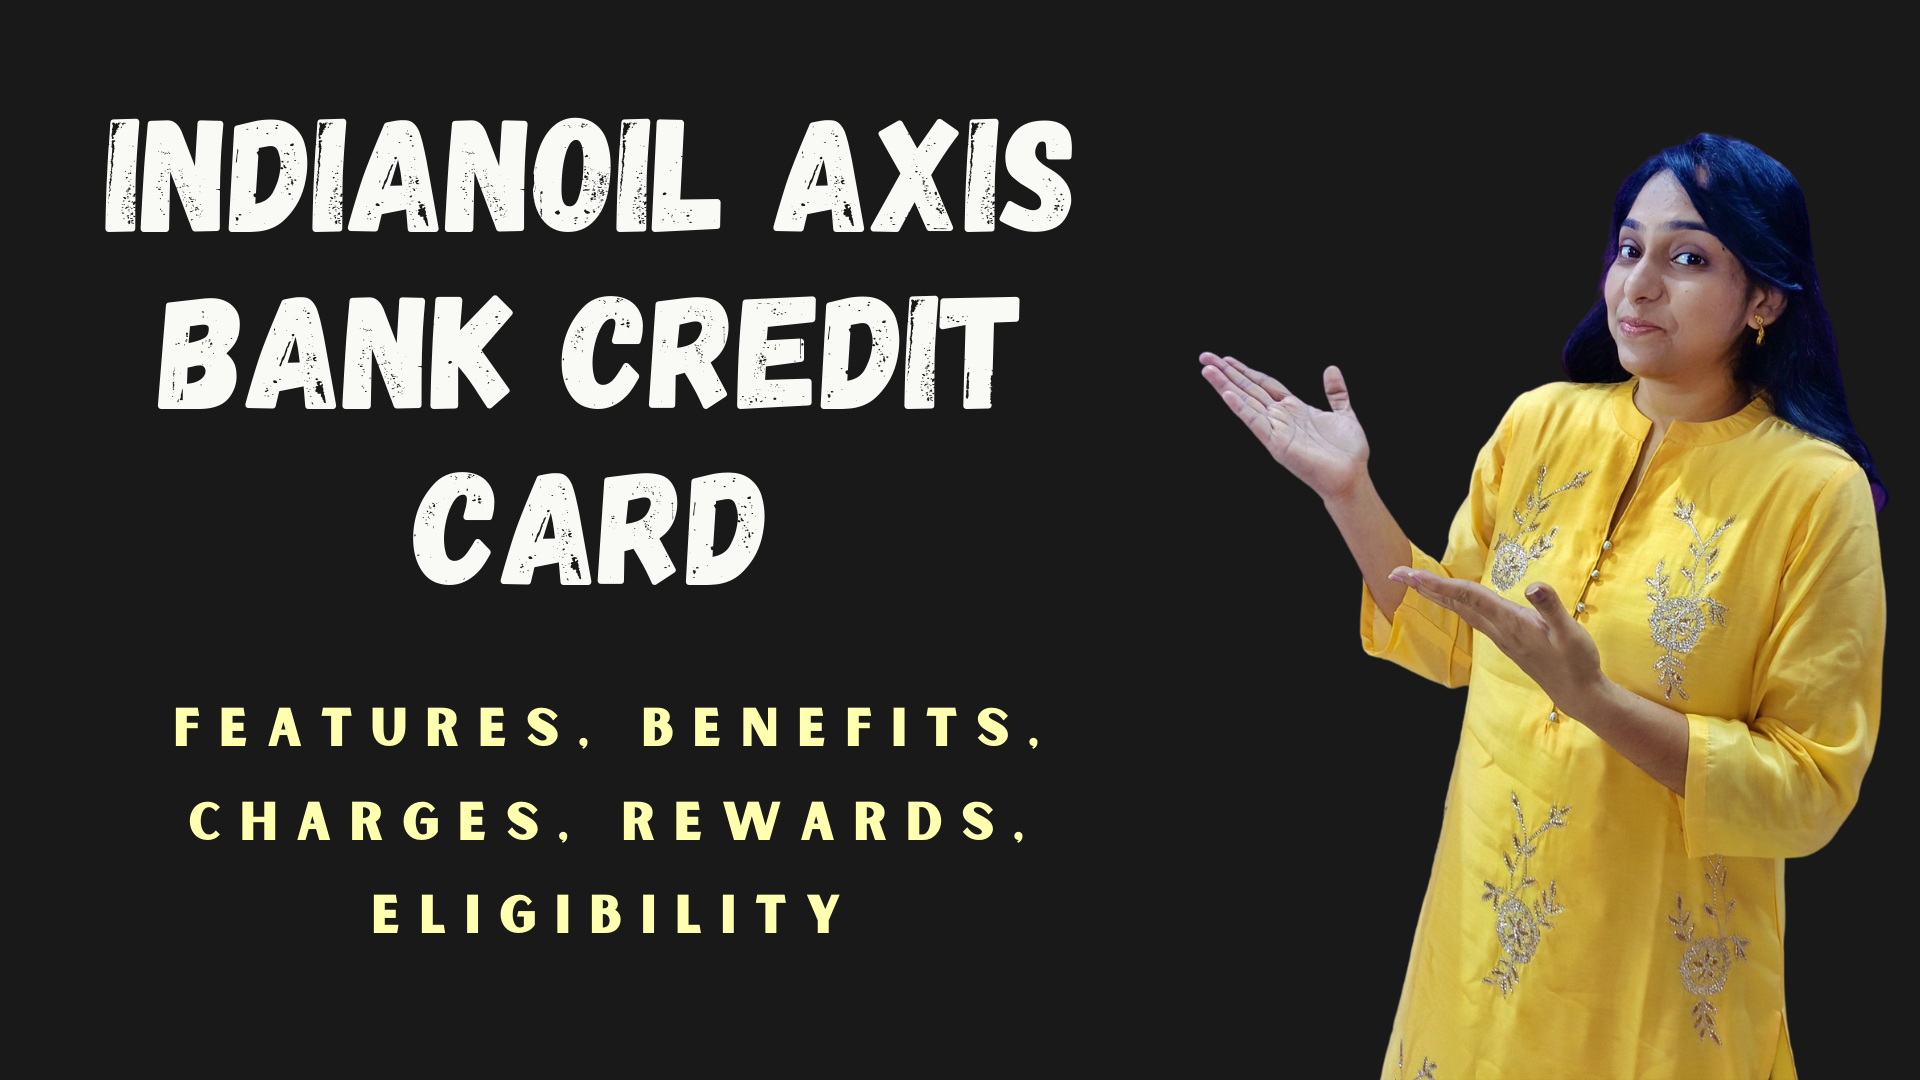 IndianOil Axis Bank Credit Card | Features, Benefits, Charges, Rewards, Eligibility